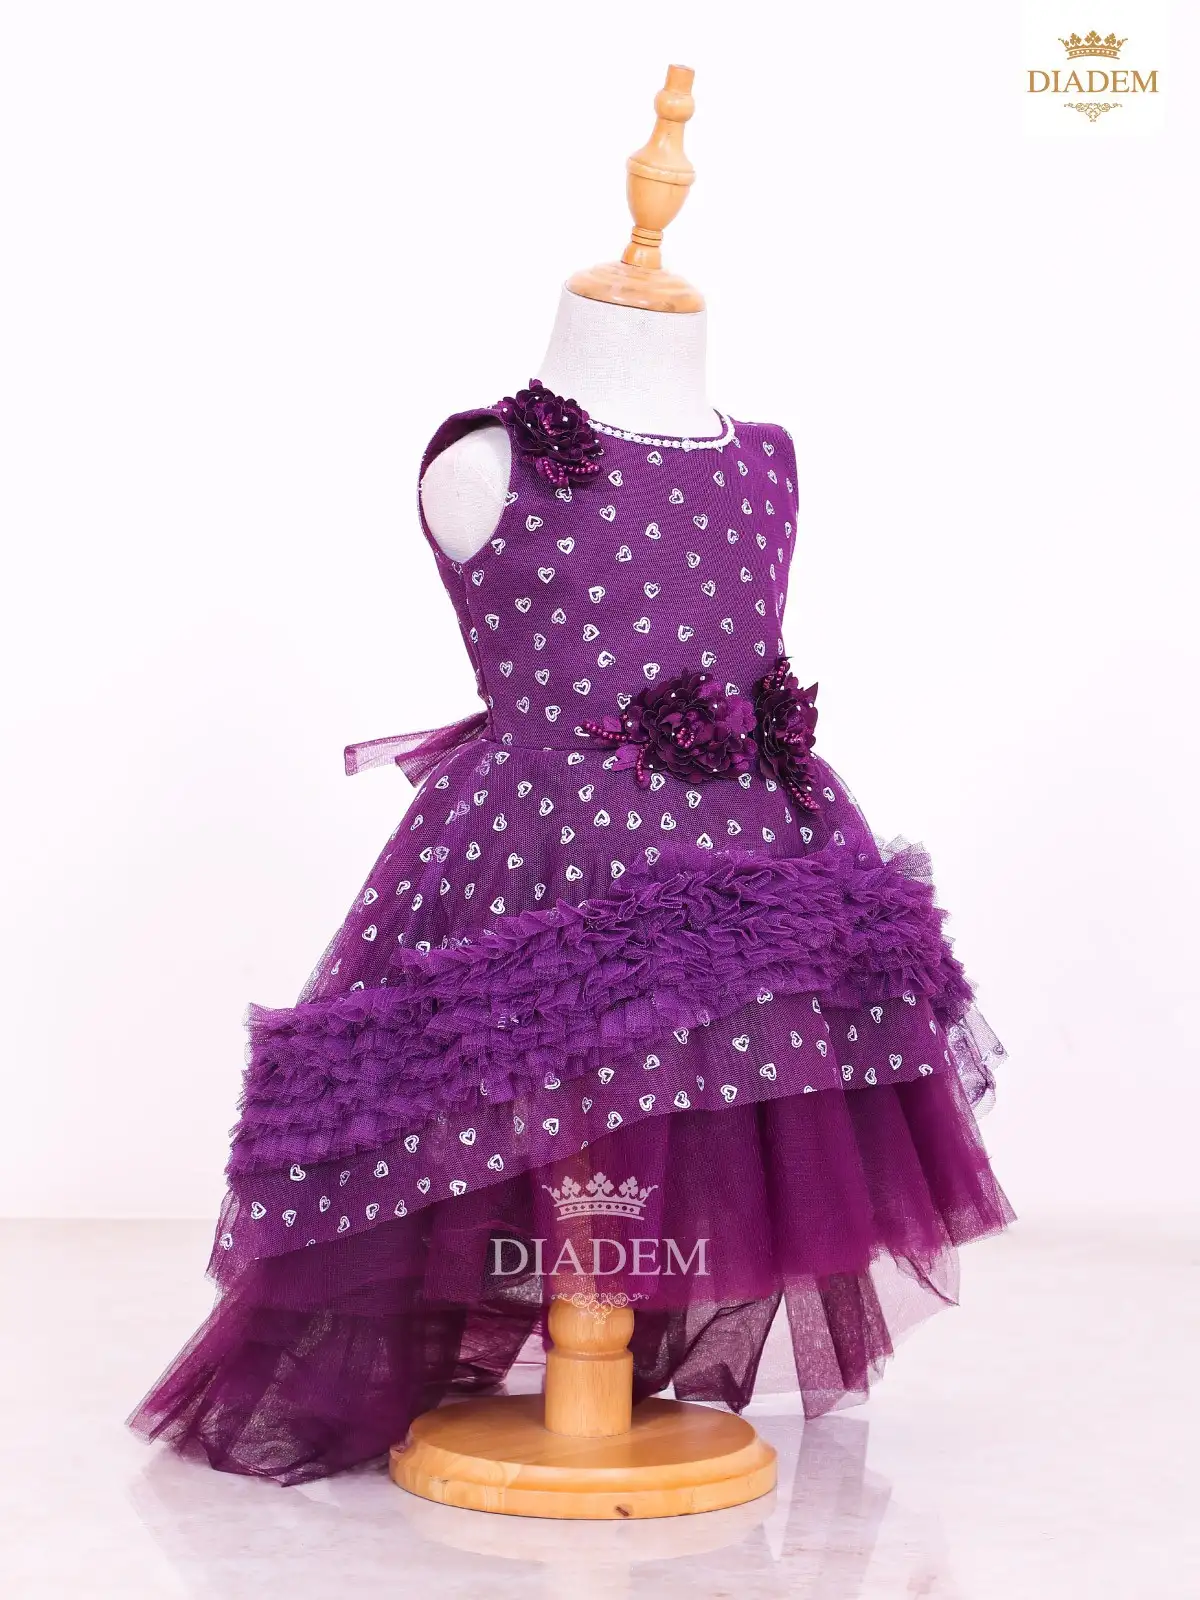 Dark Violet Gown Adorned In Stones And Beads